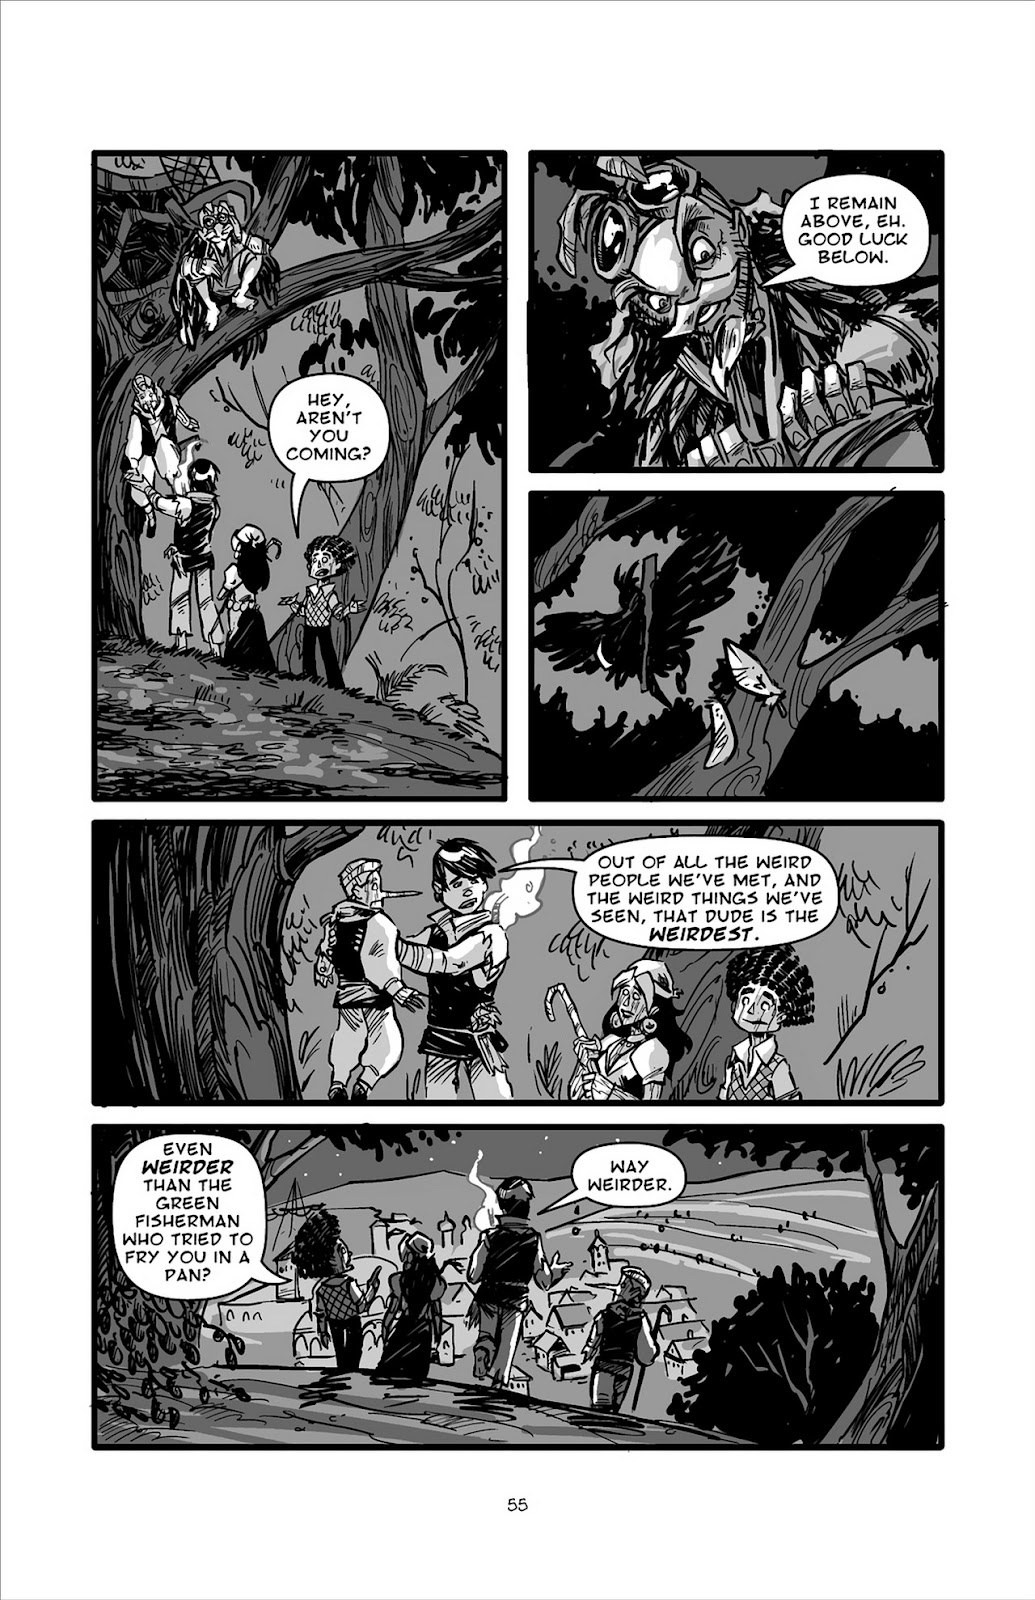 Pinocchio: Vampire Slayer - Of Wood and Blood issue 3 - Page 6